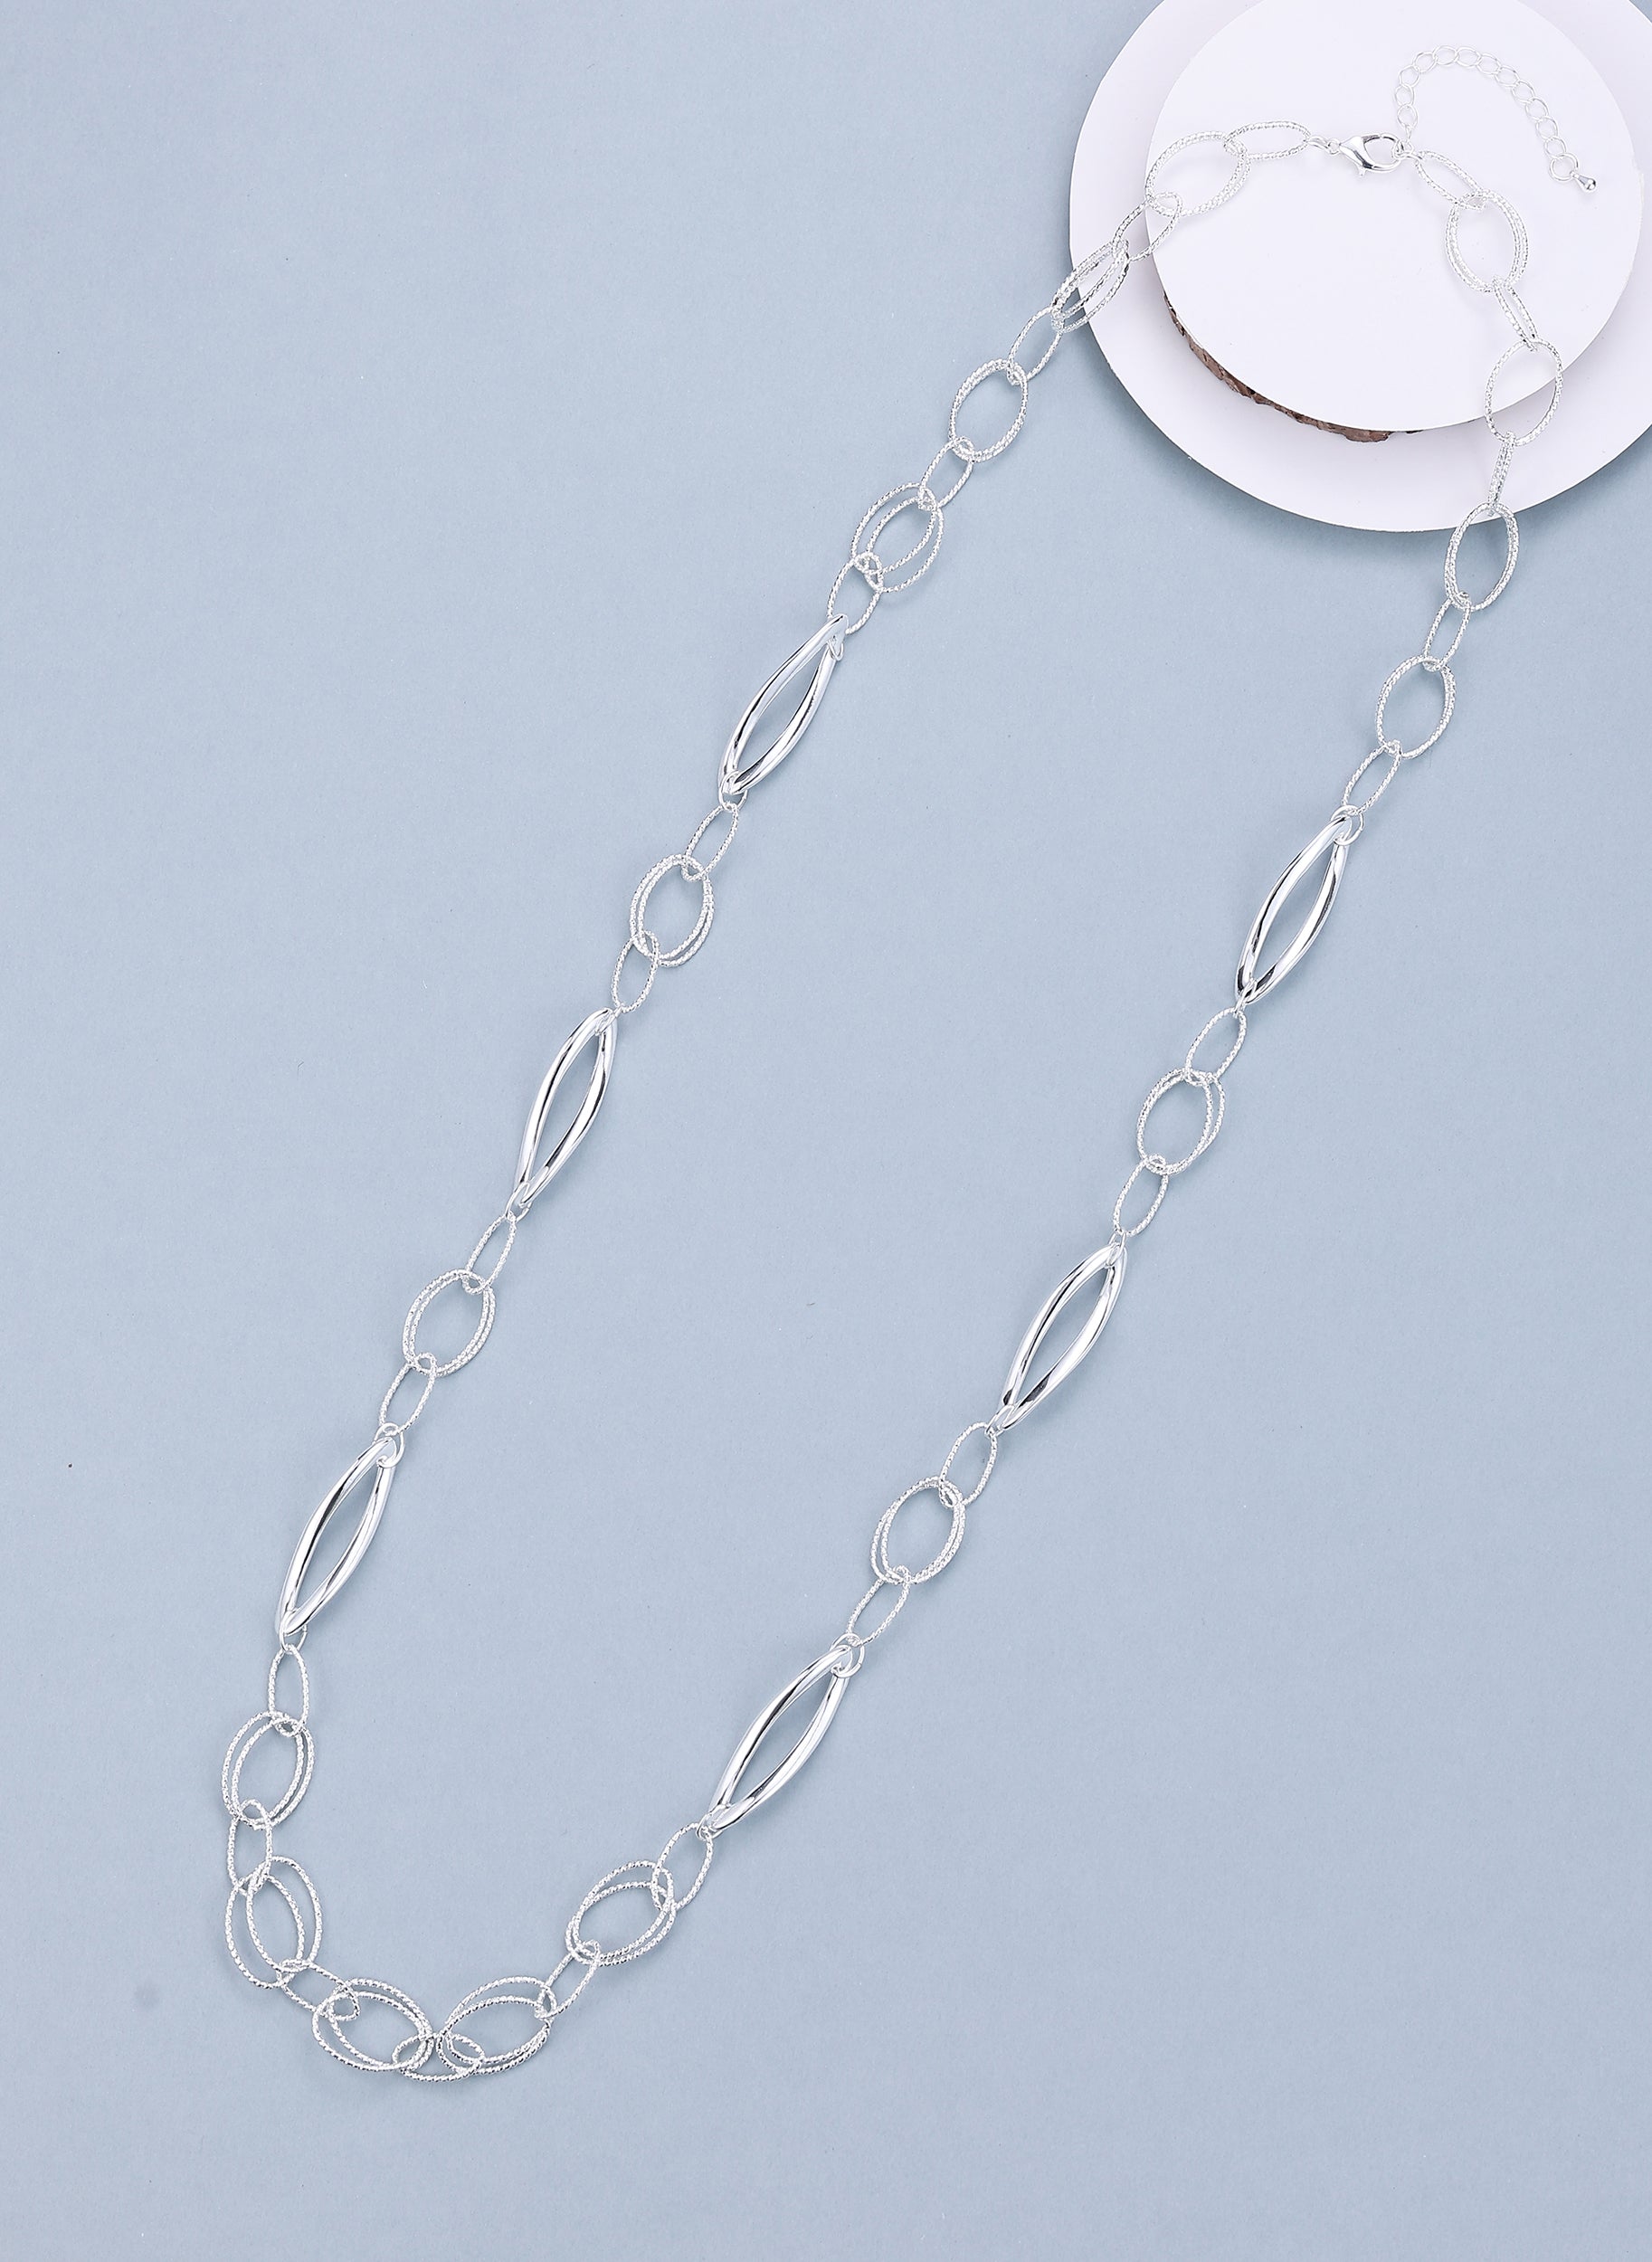 Long necklace, with silver interlinked circles - on a silver chain